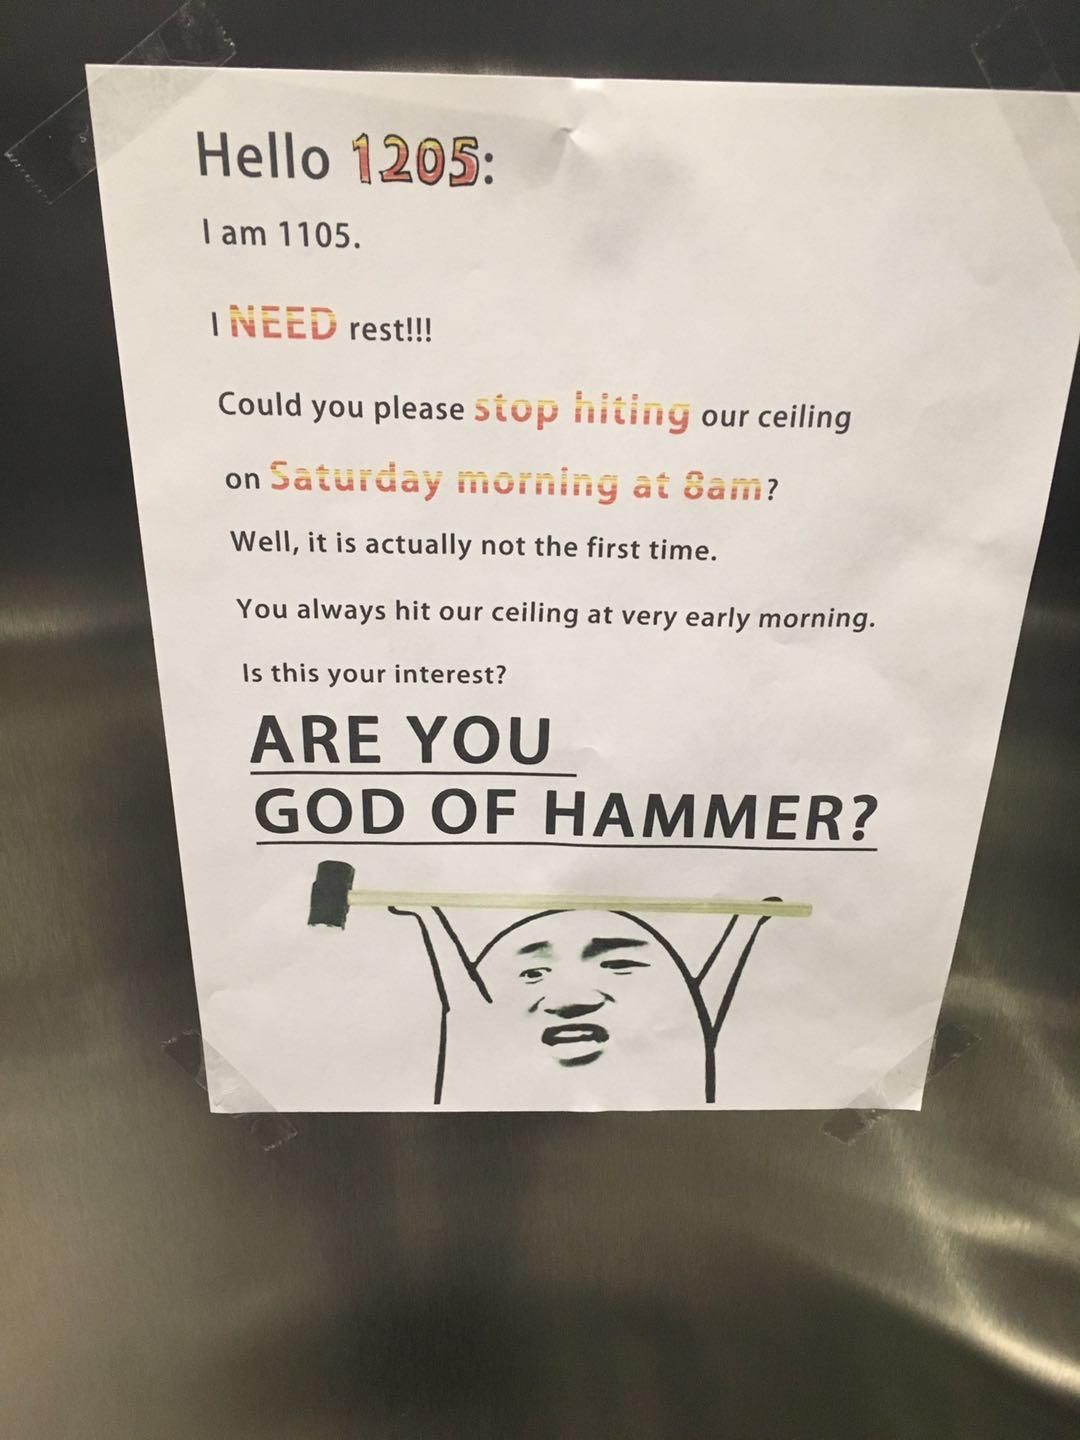 Saw this in my apartment elevator